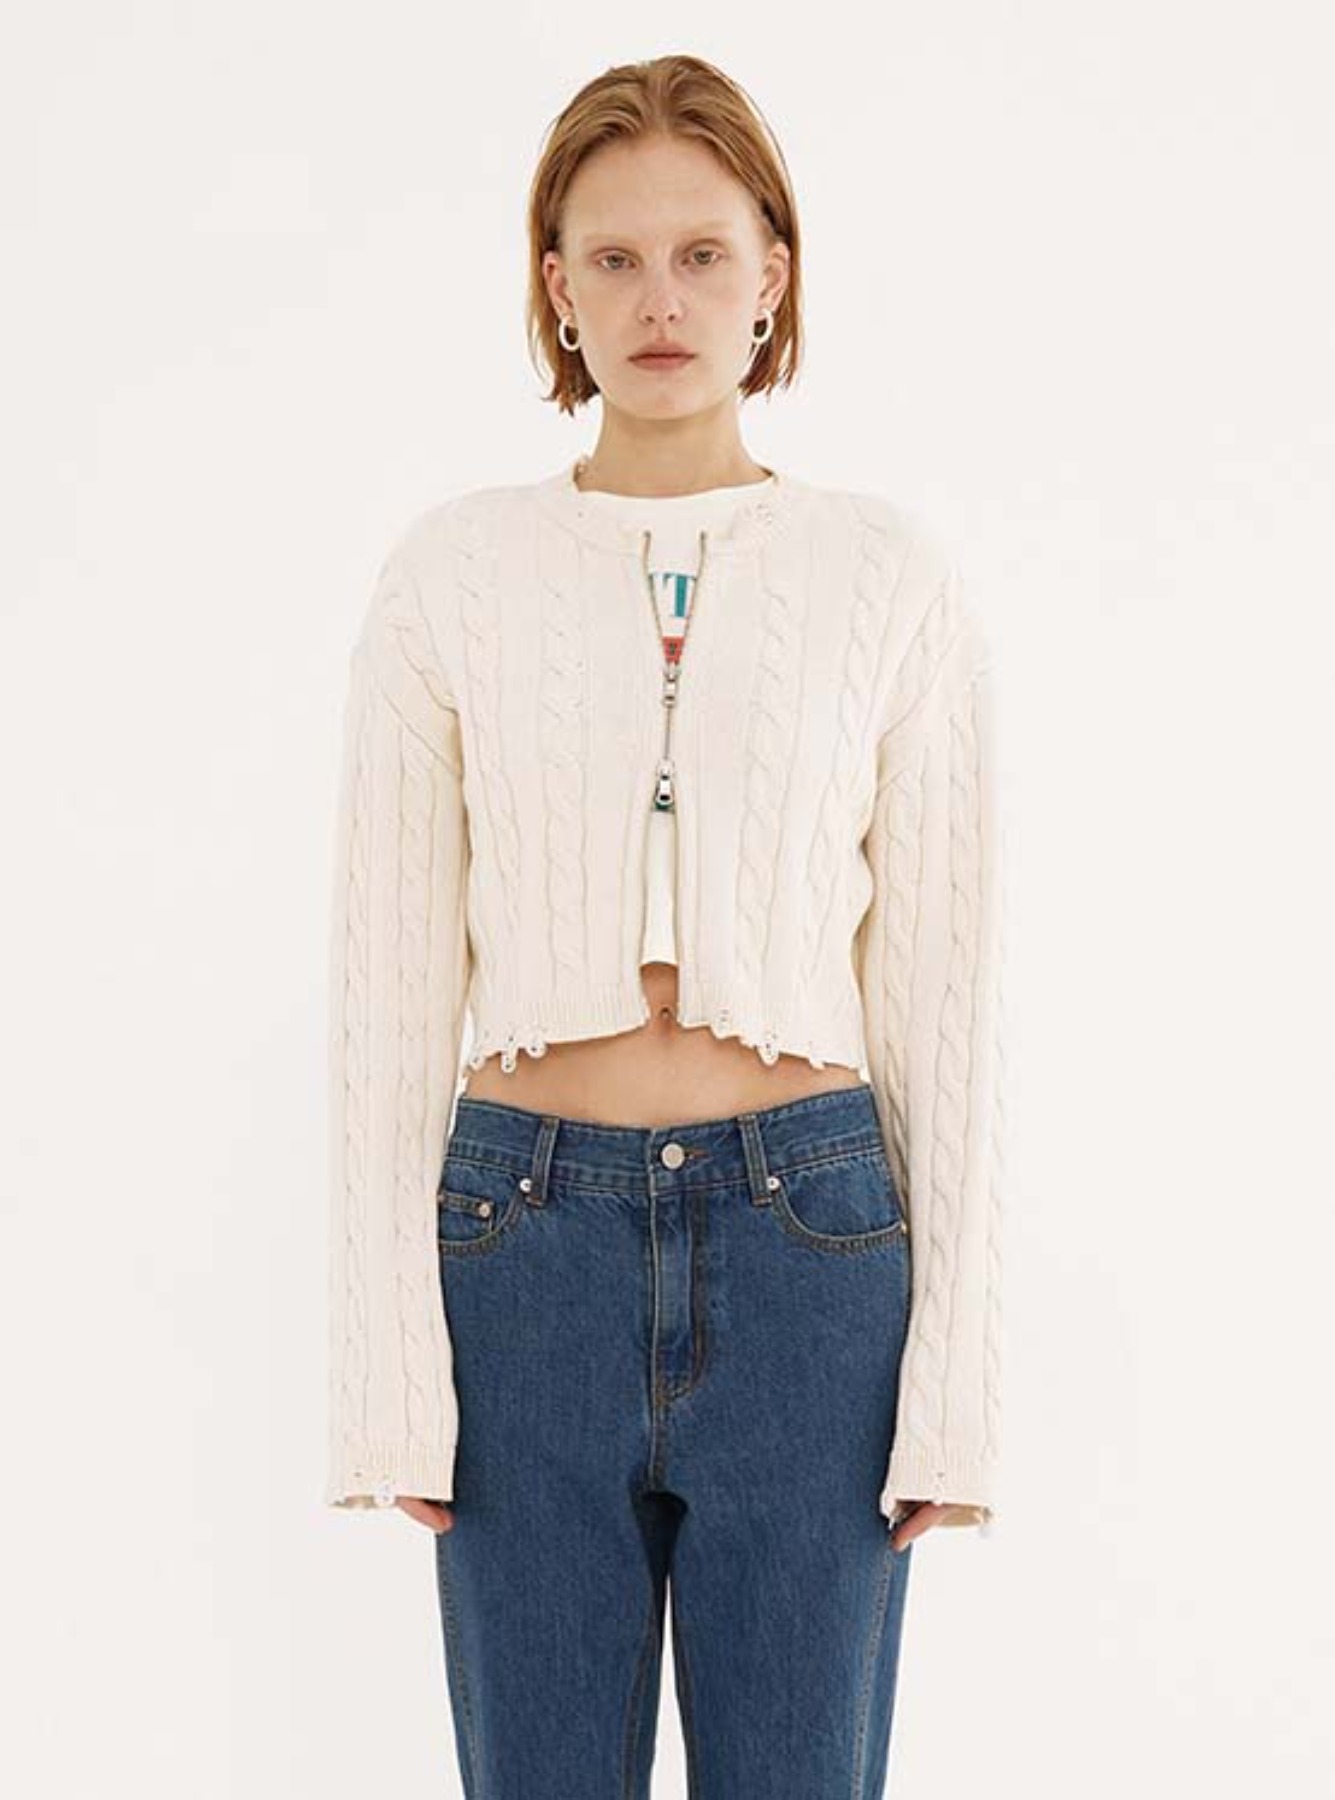 2 Way Zipper Cropped Knit Top in Ivory VK3SM146-03